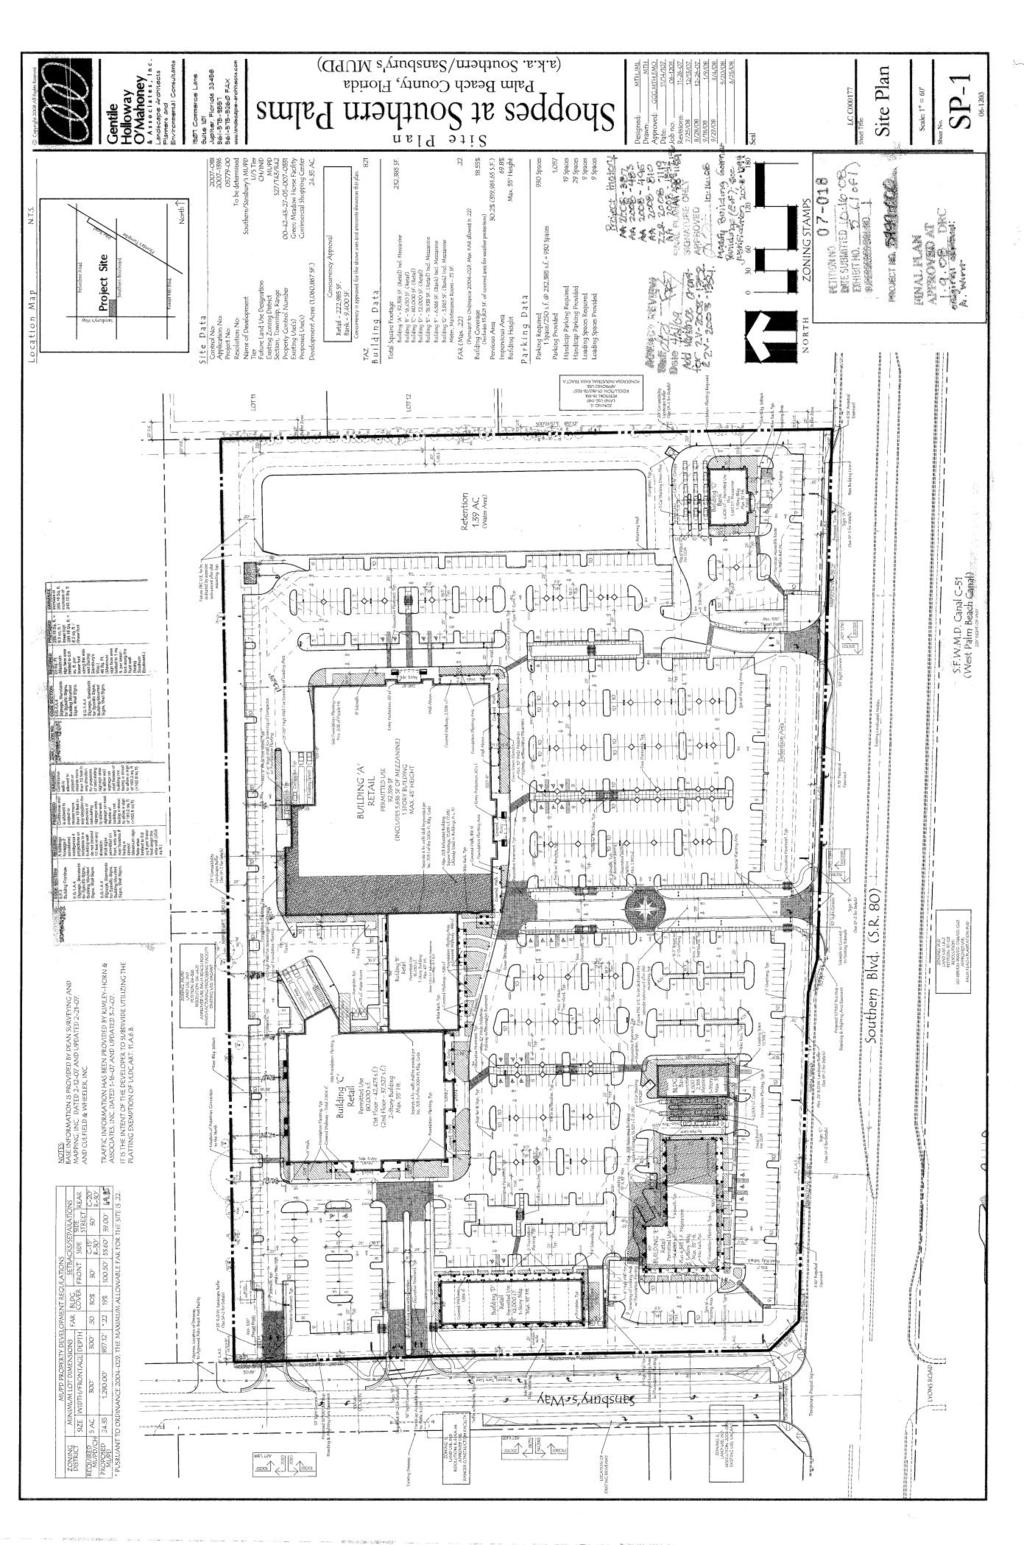 Figure 5 Approved Site Plan dated